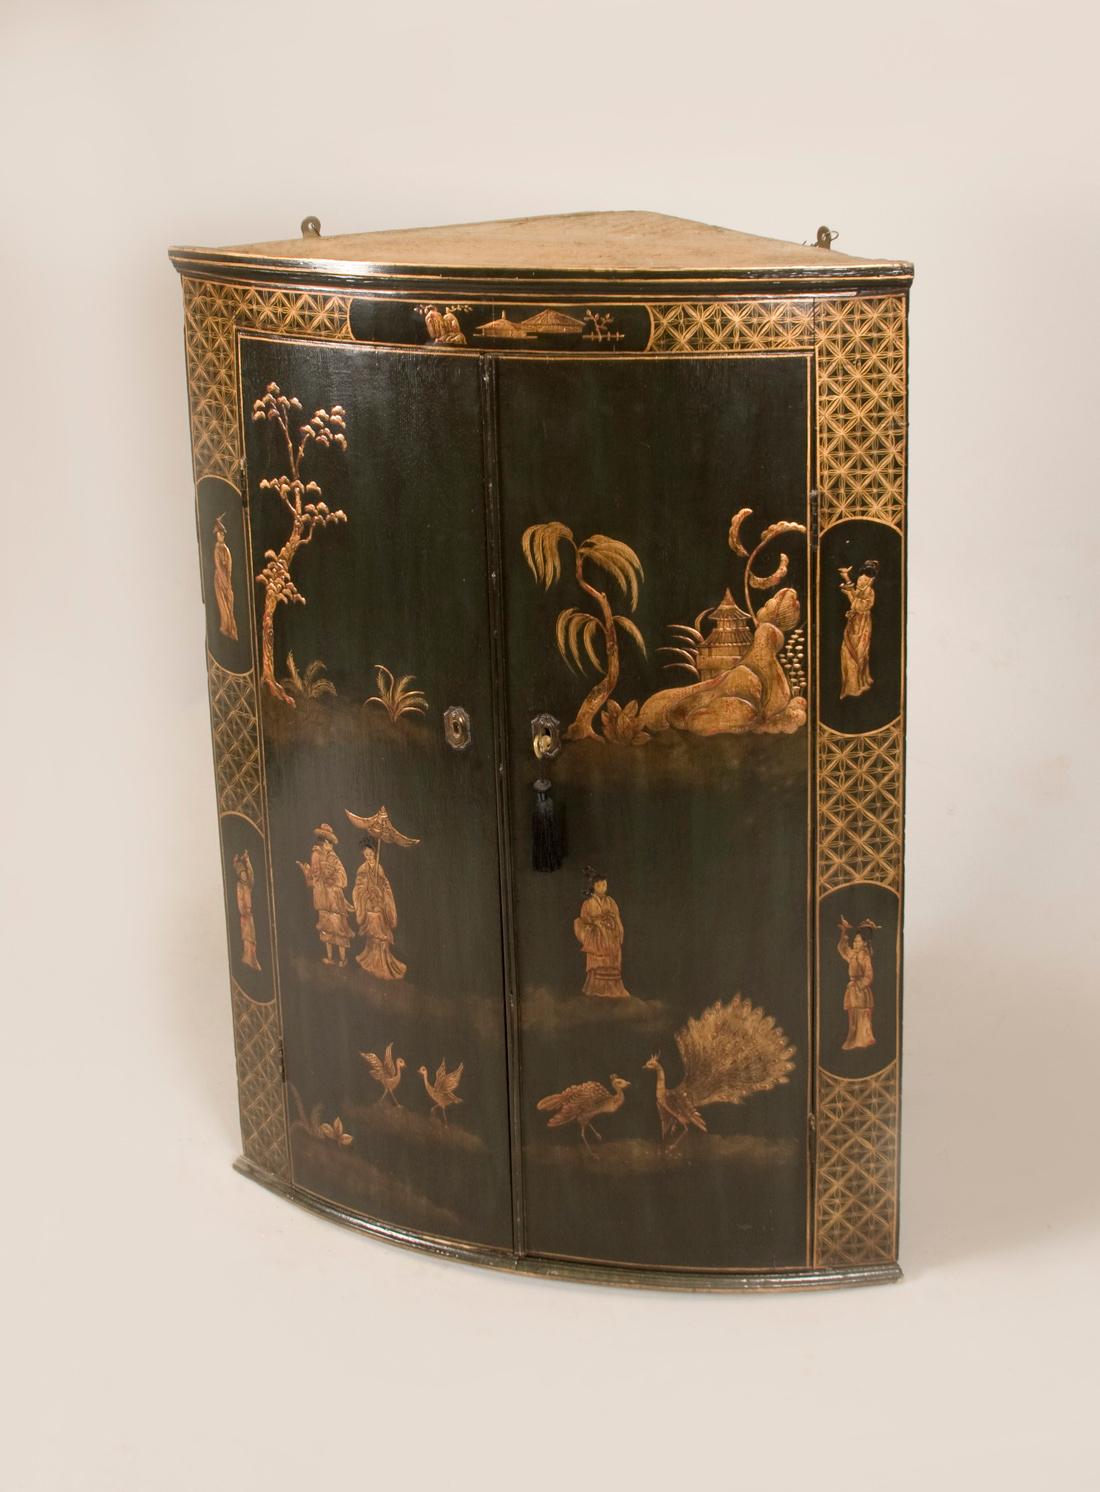 This is a English Antique Georgian bowfront cabinet, which has fixed
shelfes inside and a locking door.
The Chinoiserie decoration or Japanning as it is known in Europe,
is beautifully decorated with Figures, Birds, Rocks and Tree's, and
a